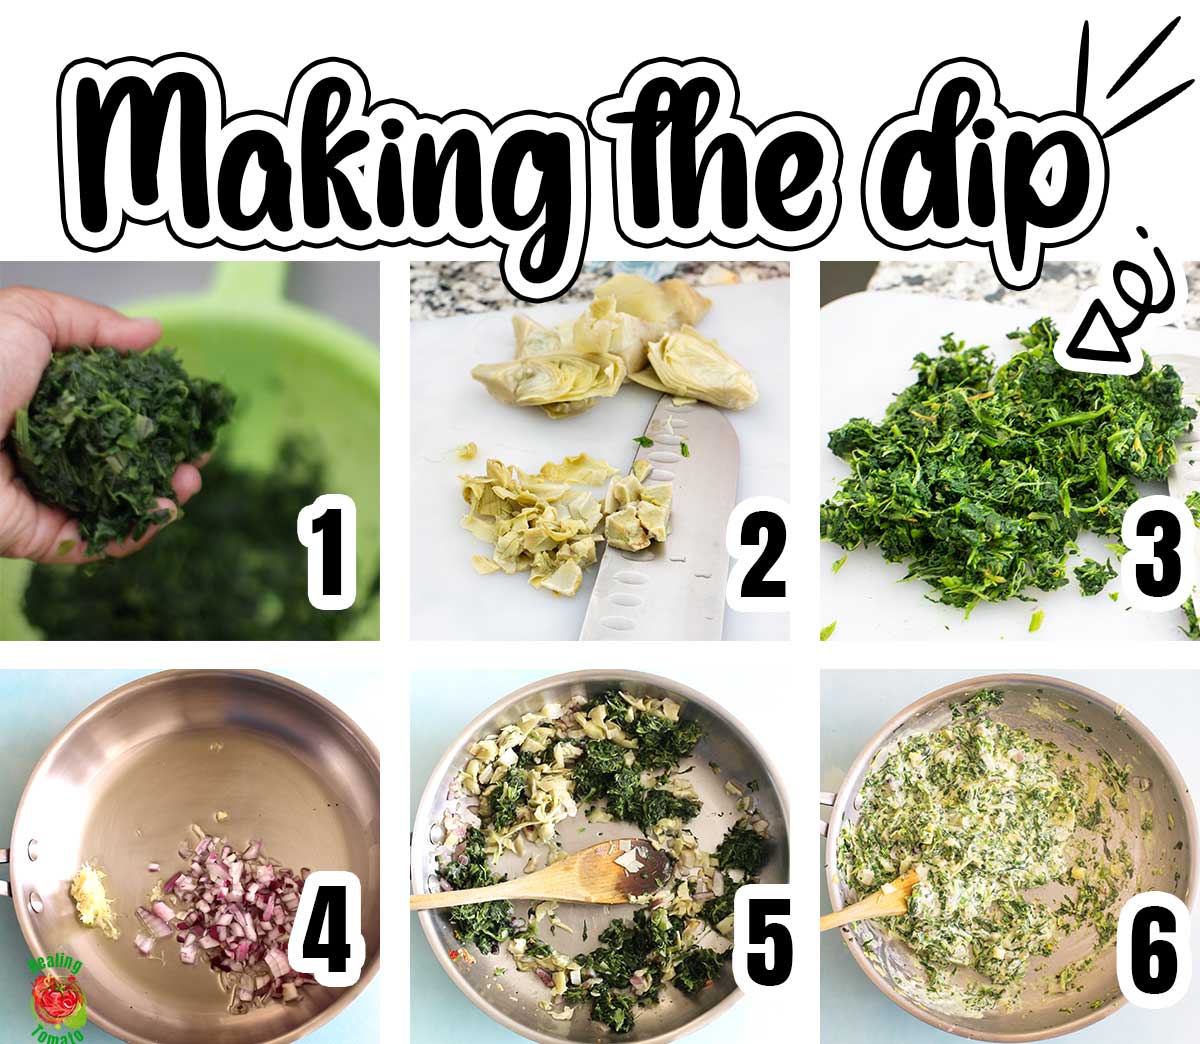 Collage of 4 steps to make the spinach artichoke dip. Each collage has a number corresponding to the step.